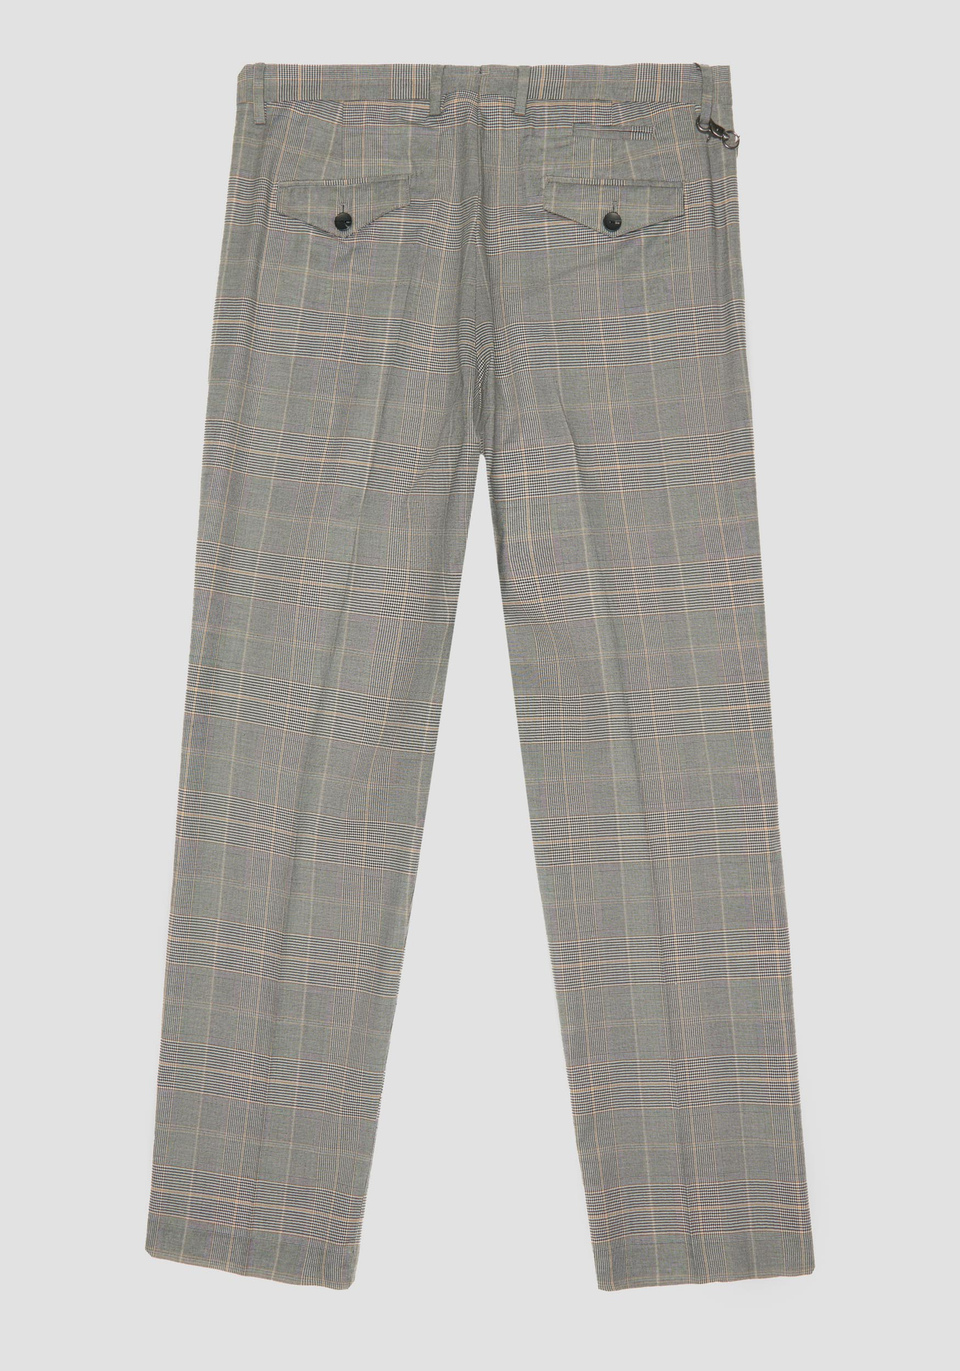 HOSE EDITH SLIM FIT AUS CHAMBRAY-BAUMWOLLE MIT PRINCE-OF-WALES-MUSTER - Antony Morato Online Shop